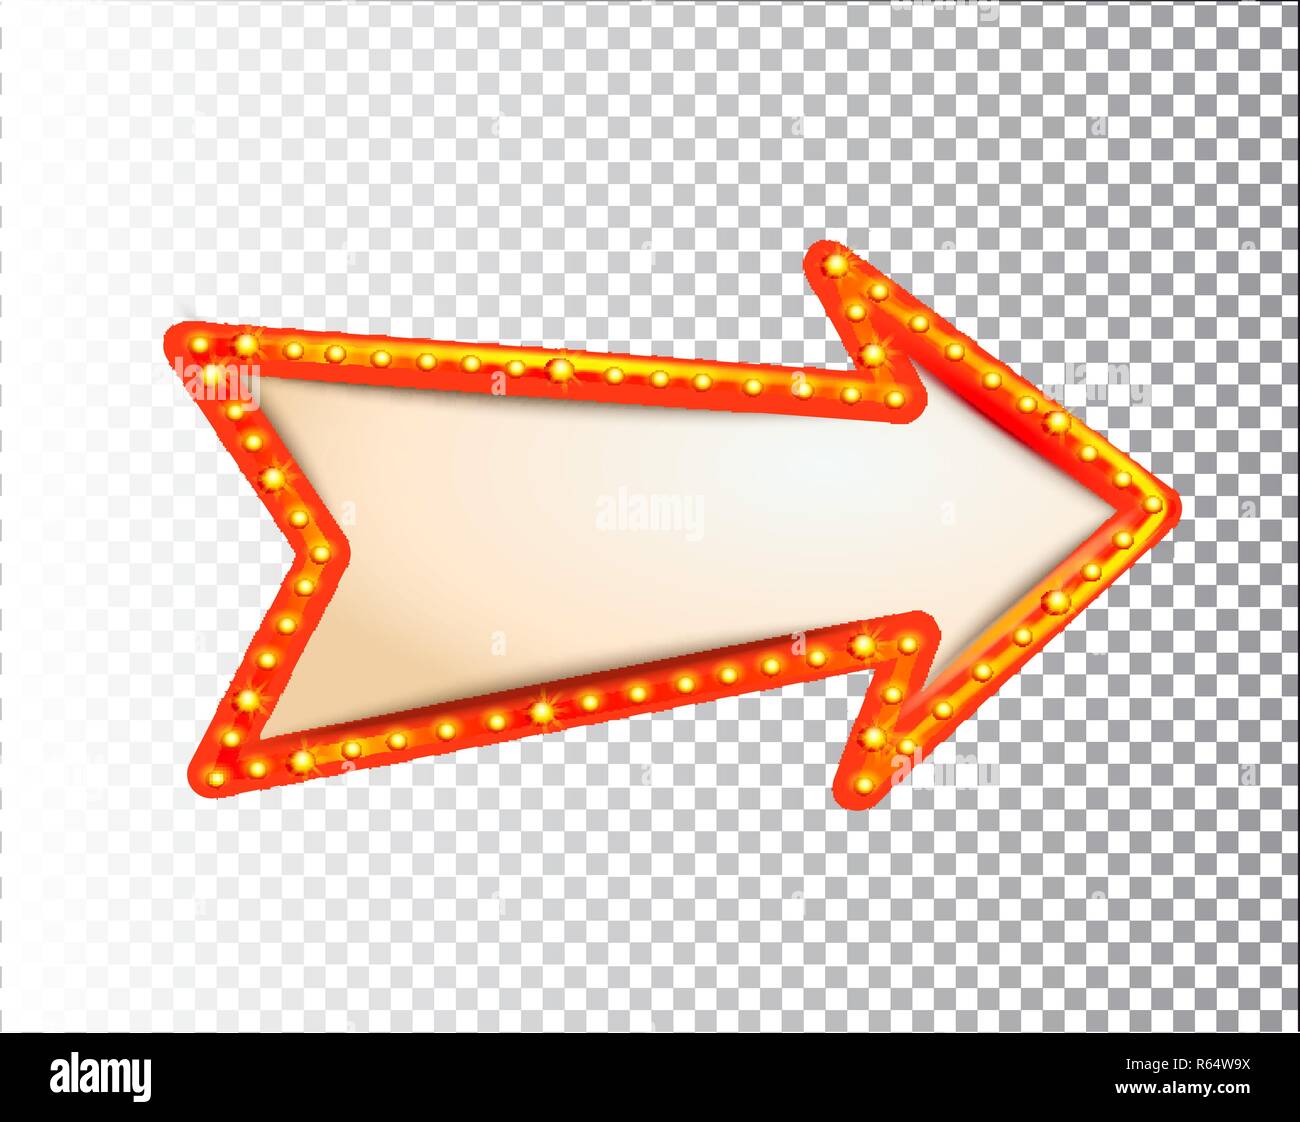 Shining isolated retro bulb light frame arrow on transparent background. Vintage style banner, sign, signboard. Perfect template for shows, casino, ci Stock Vector